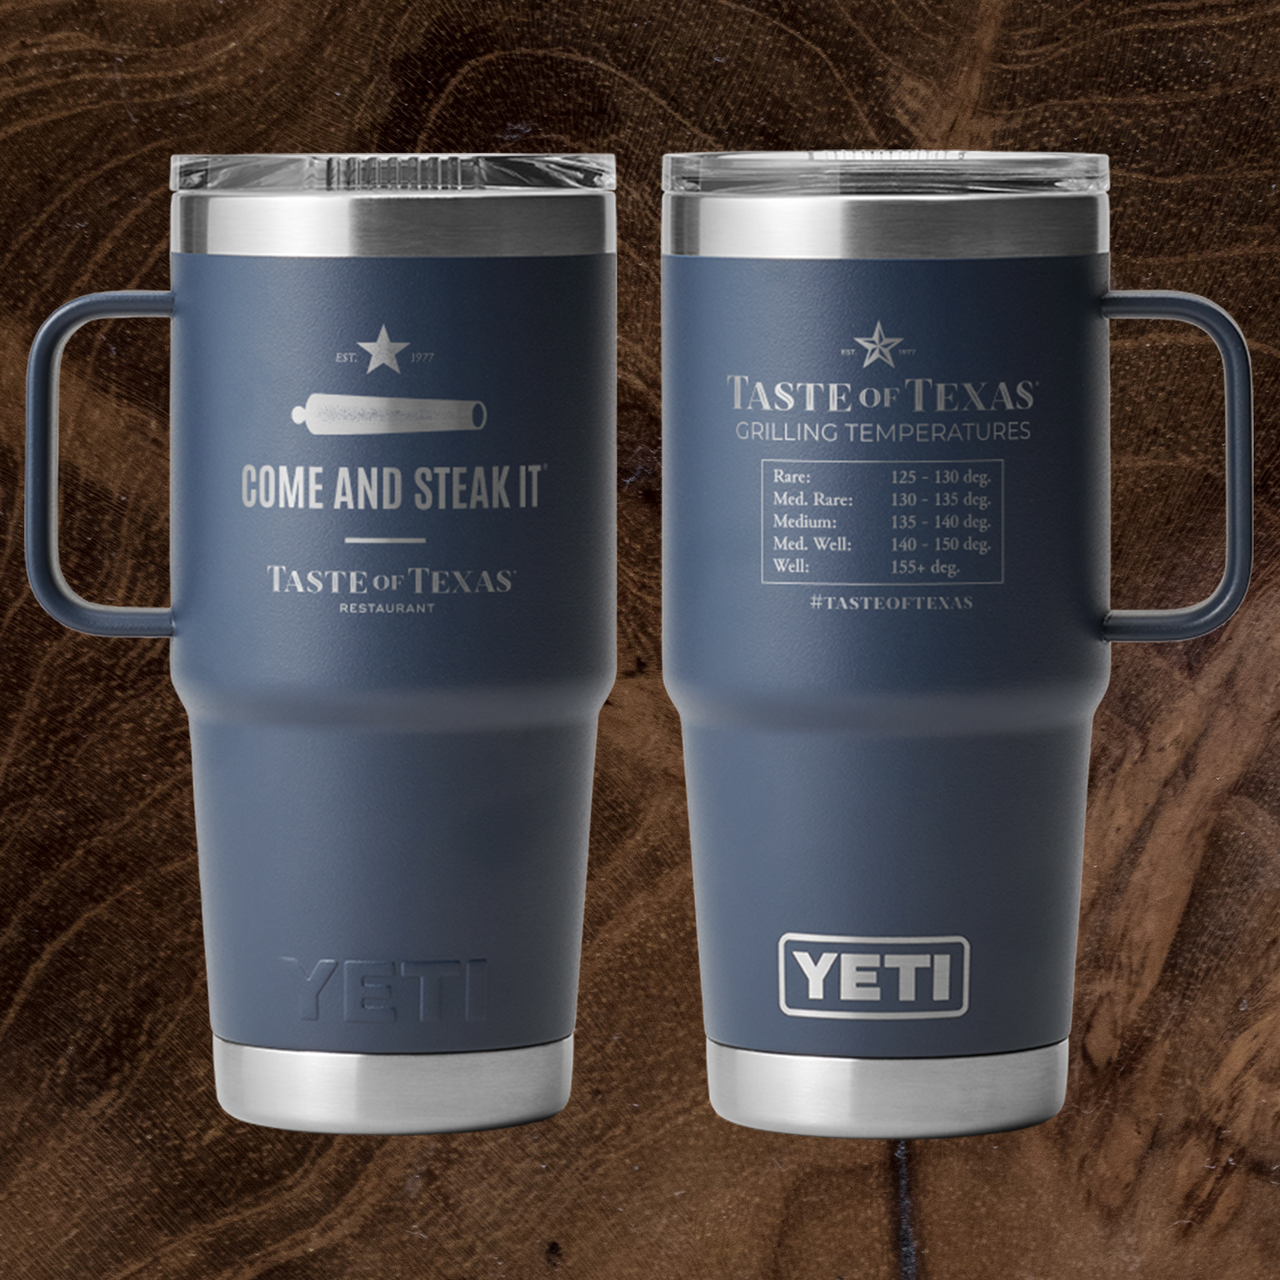 https://cdn11.bigcommerce.com/s-39628/images/stencil/1280x1280/products/617/1874/Taste_of_Texas_Come_and_Steak_It_20_Oz_Yeti_Travel_Mug_-_Front_and_Back_-_Wooden_Background__95510.1698338838.png?c=2